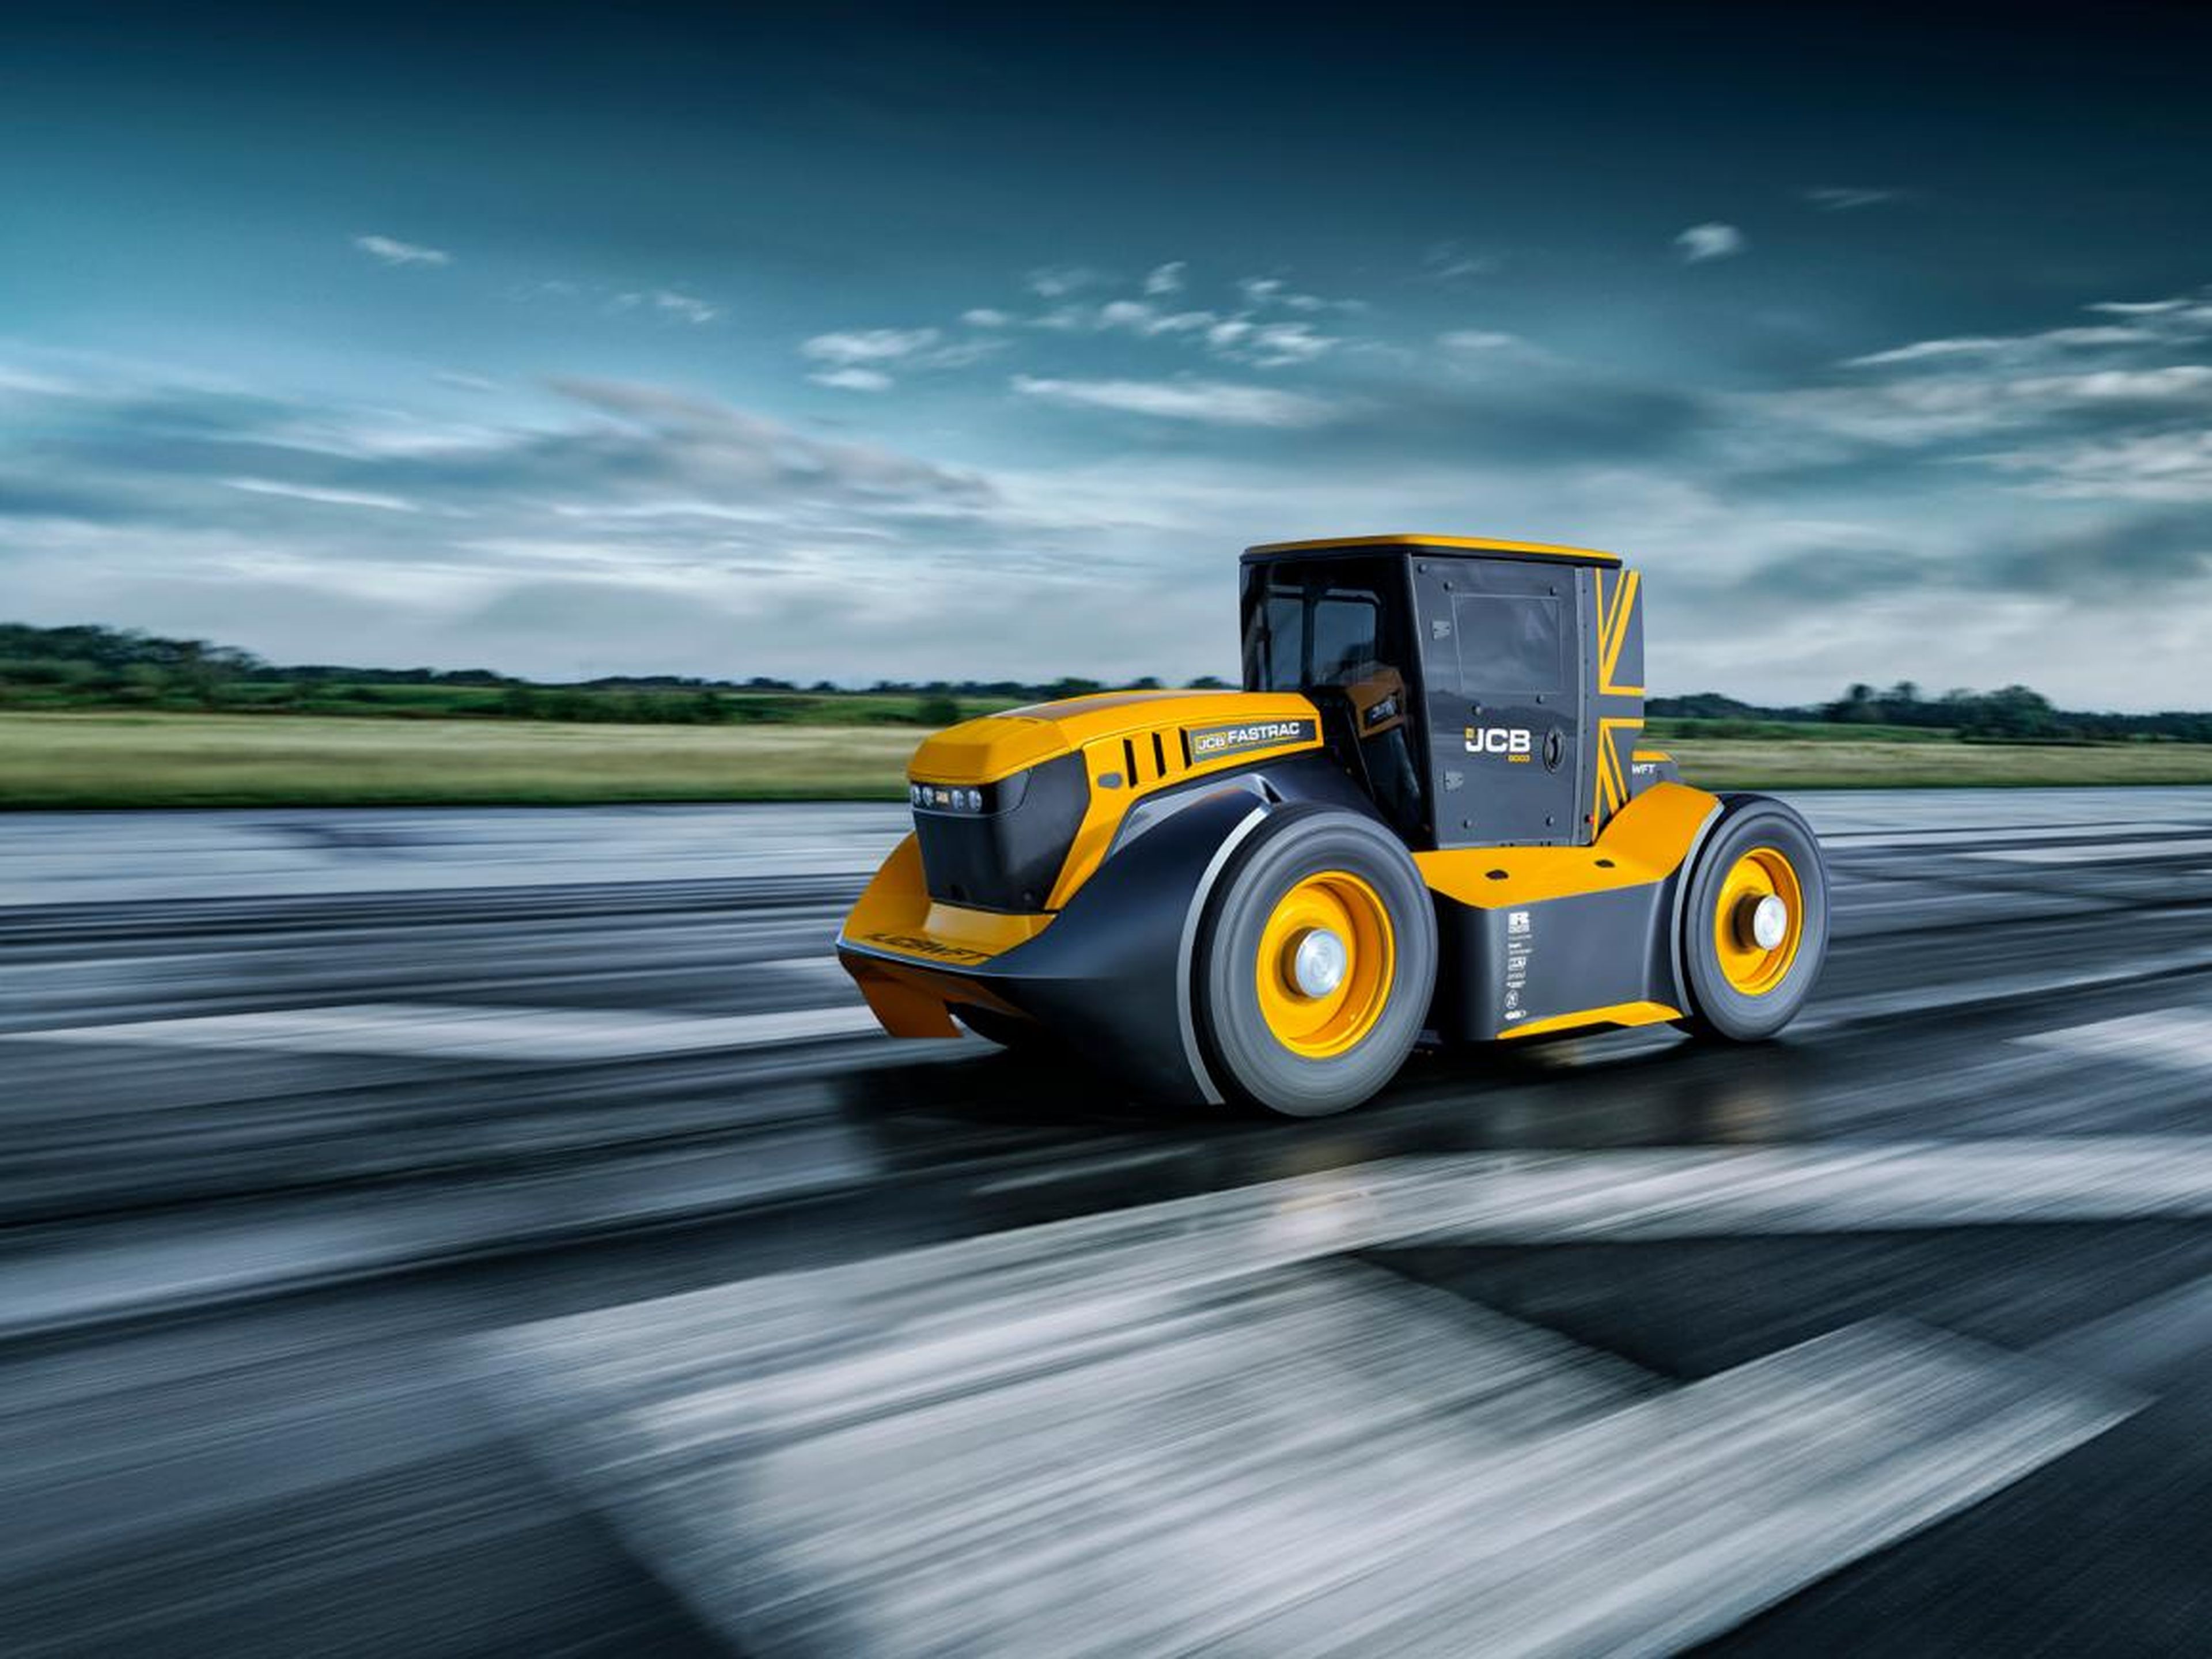 The unmodified tractor has a top speed of 43 mph, making it the world's fastest production tractor, according to JCB.